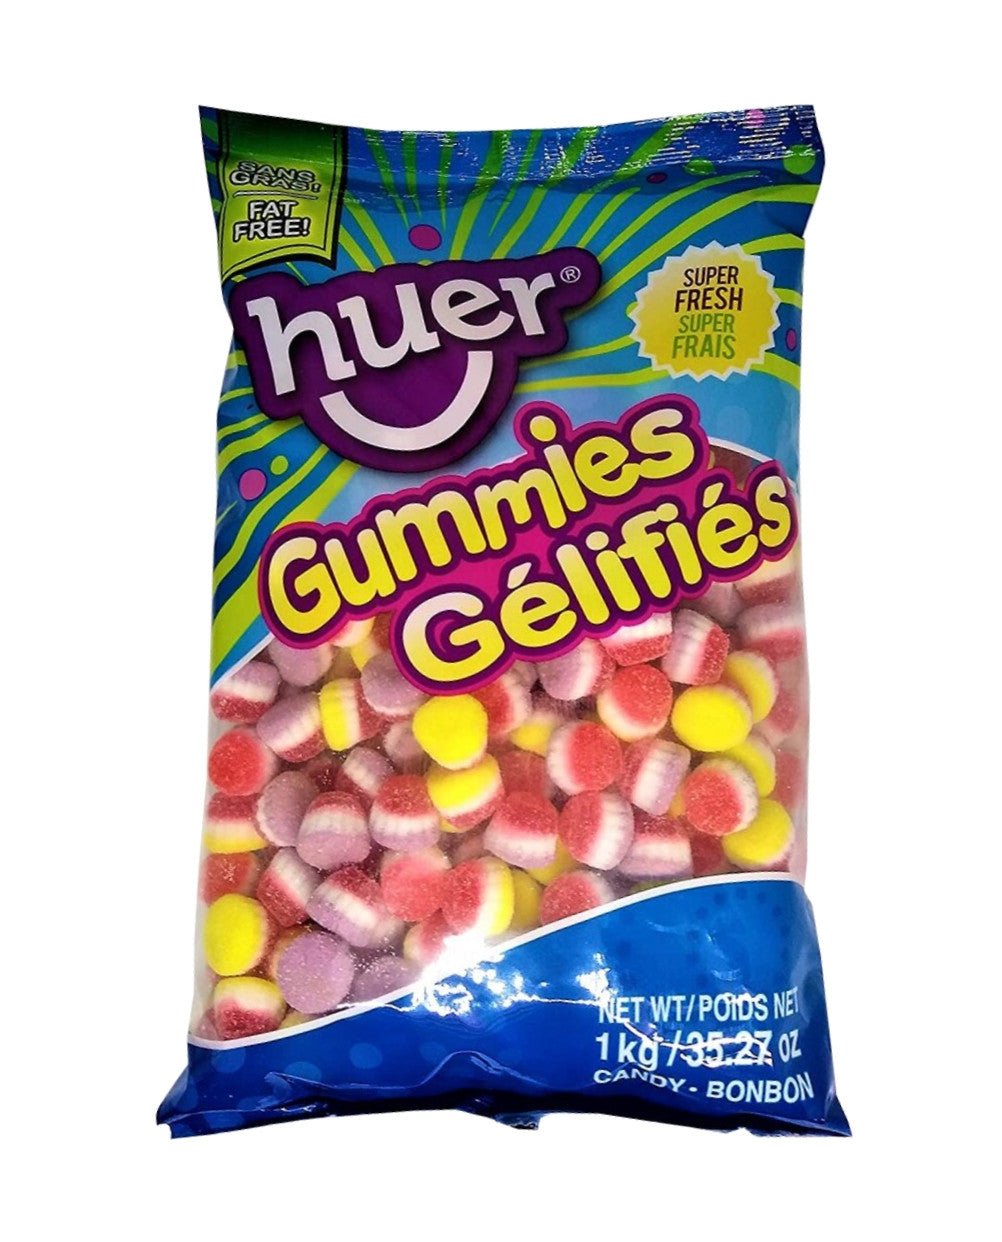 Huer Jumbo Swirl Bears Gummy Candy, 1kg/2.2lbs. {Imported from Canada}